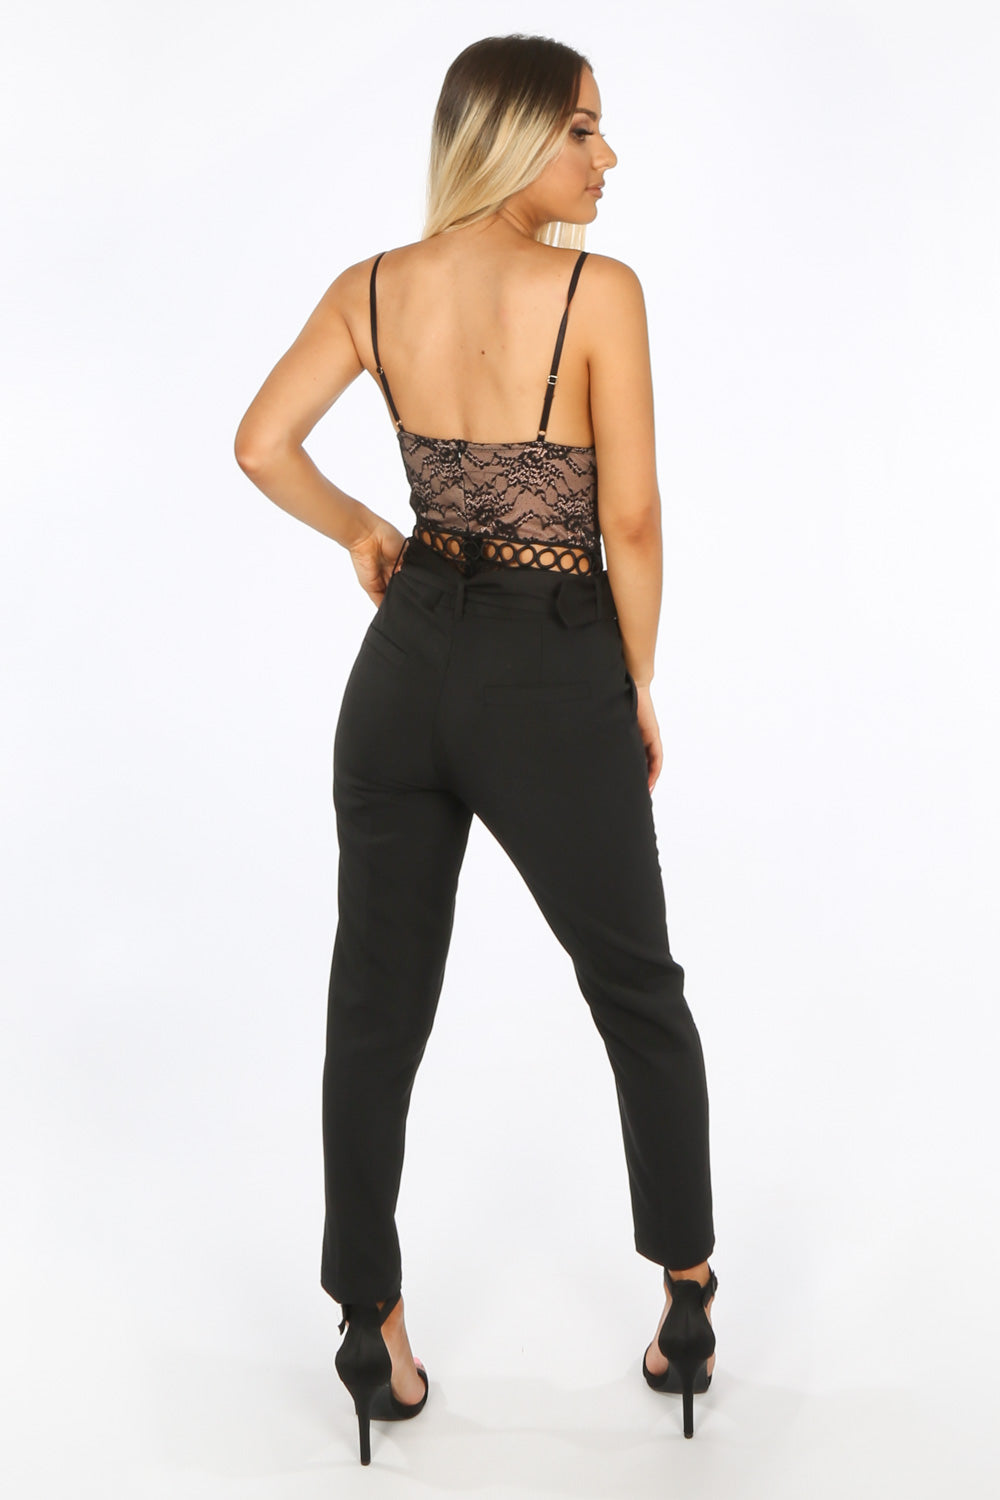 Black Sheer Lace Embroidered Bodysuit